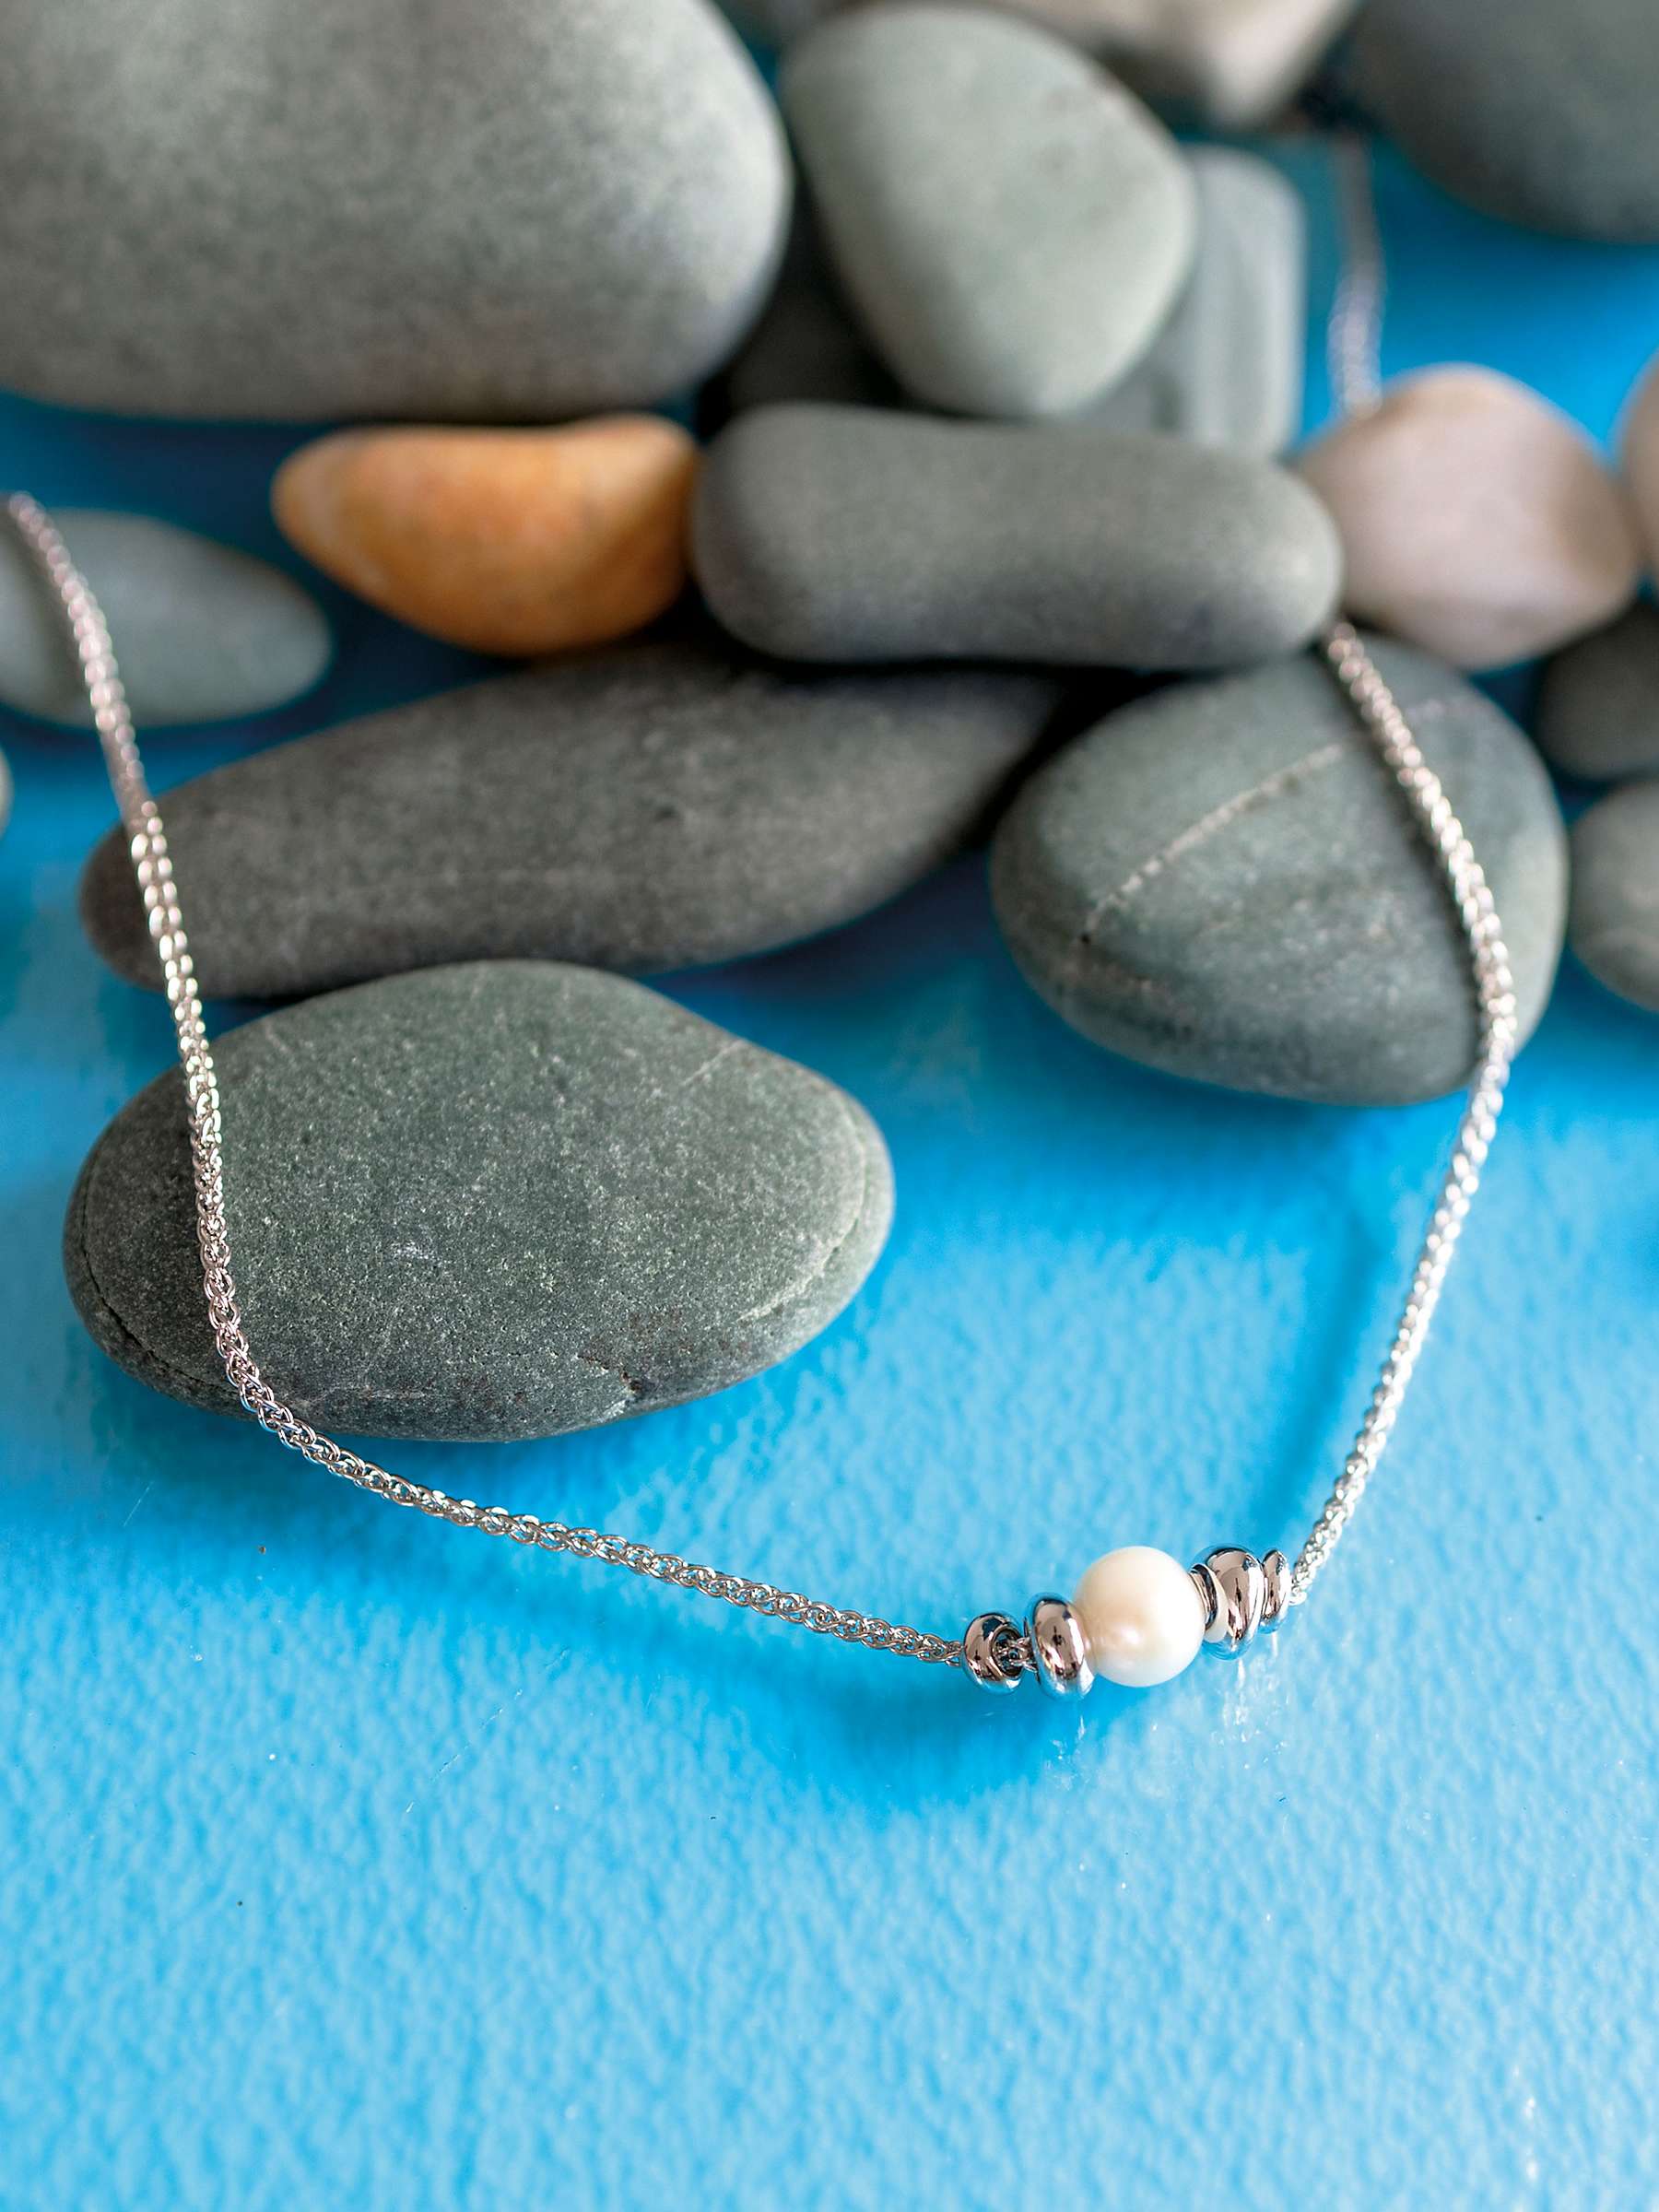 Buy Kit Heath Fresh Water And Coast Tumble Bead Pebbles Necklace, Silver Online at johnlewis.com